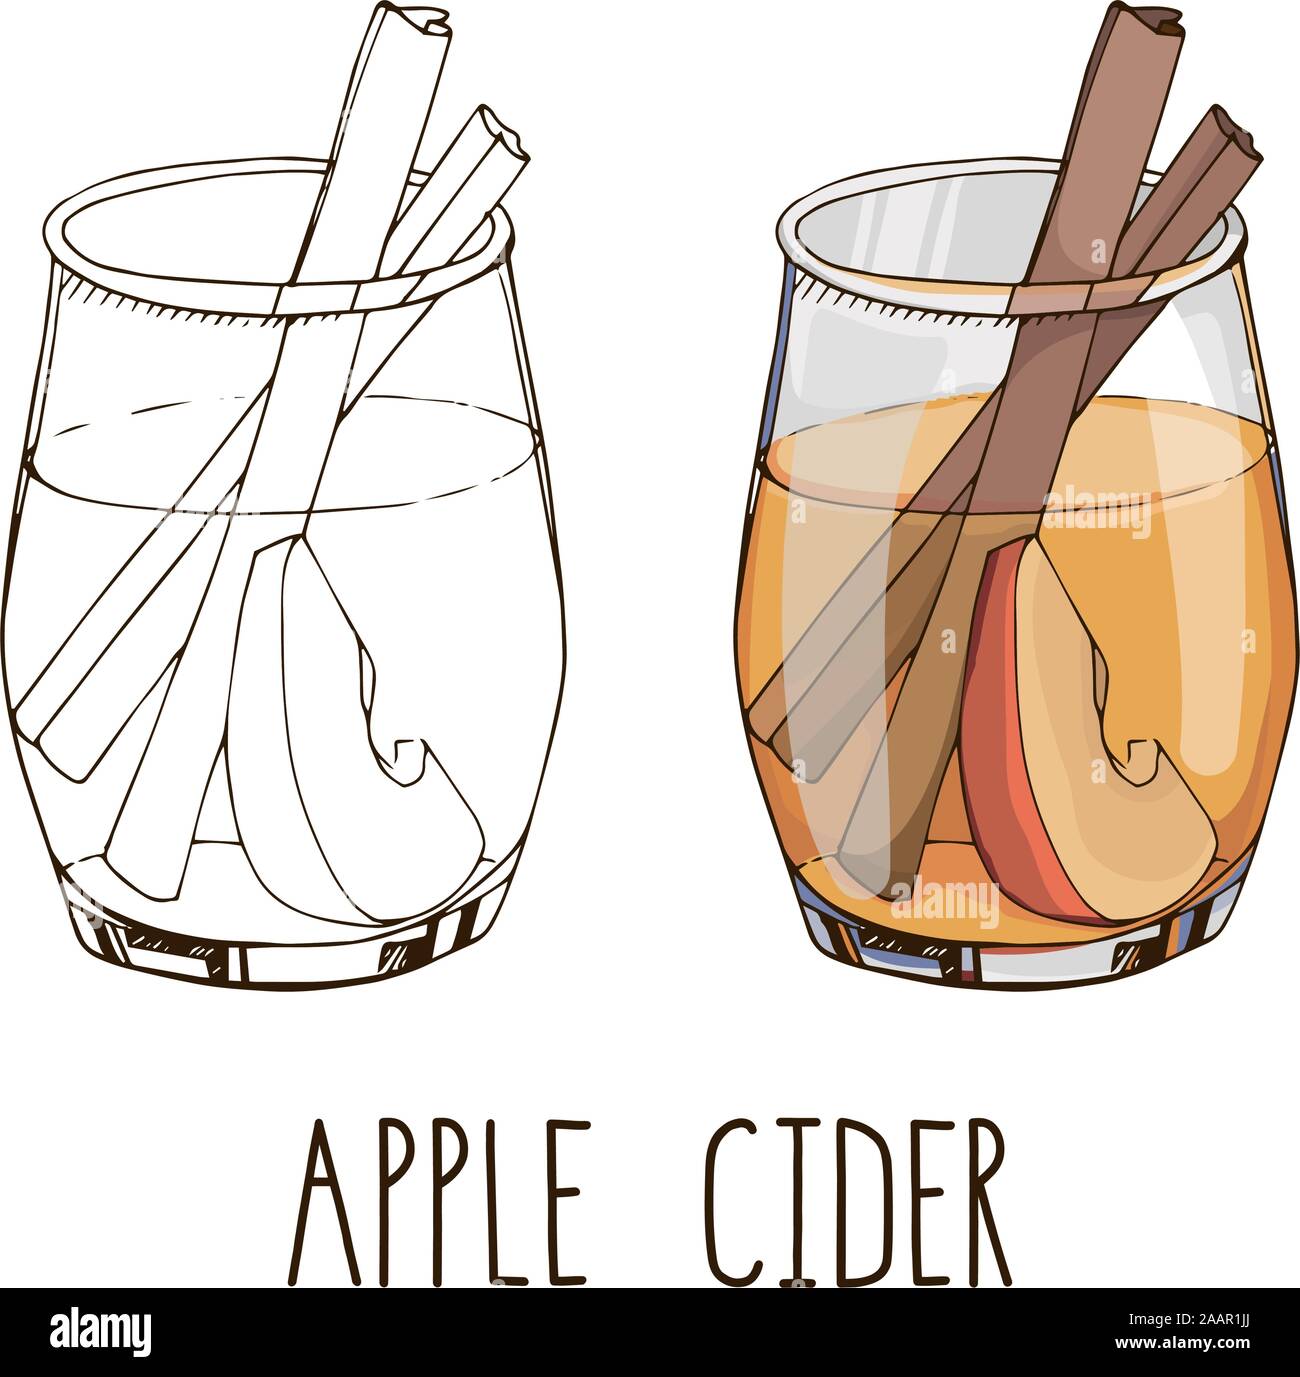 Set of hand drawn vector images isolated on white background. Apple cider with spices and fruit slices. Popular hot winter drink. Christmas cocktail. Stock Vector